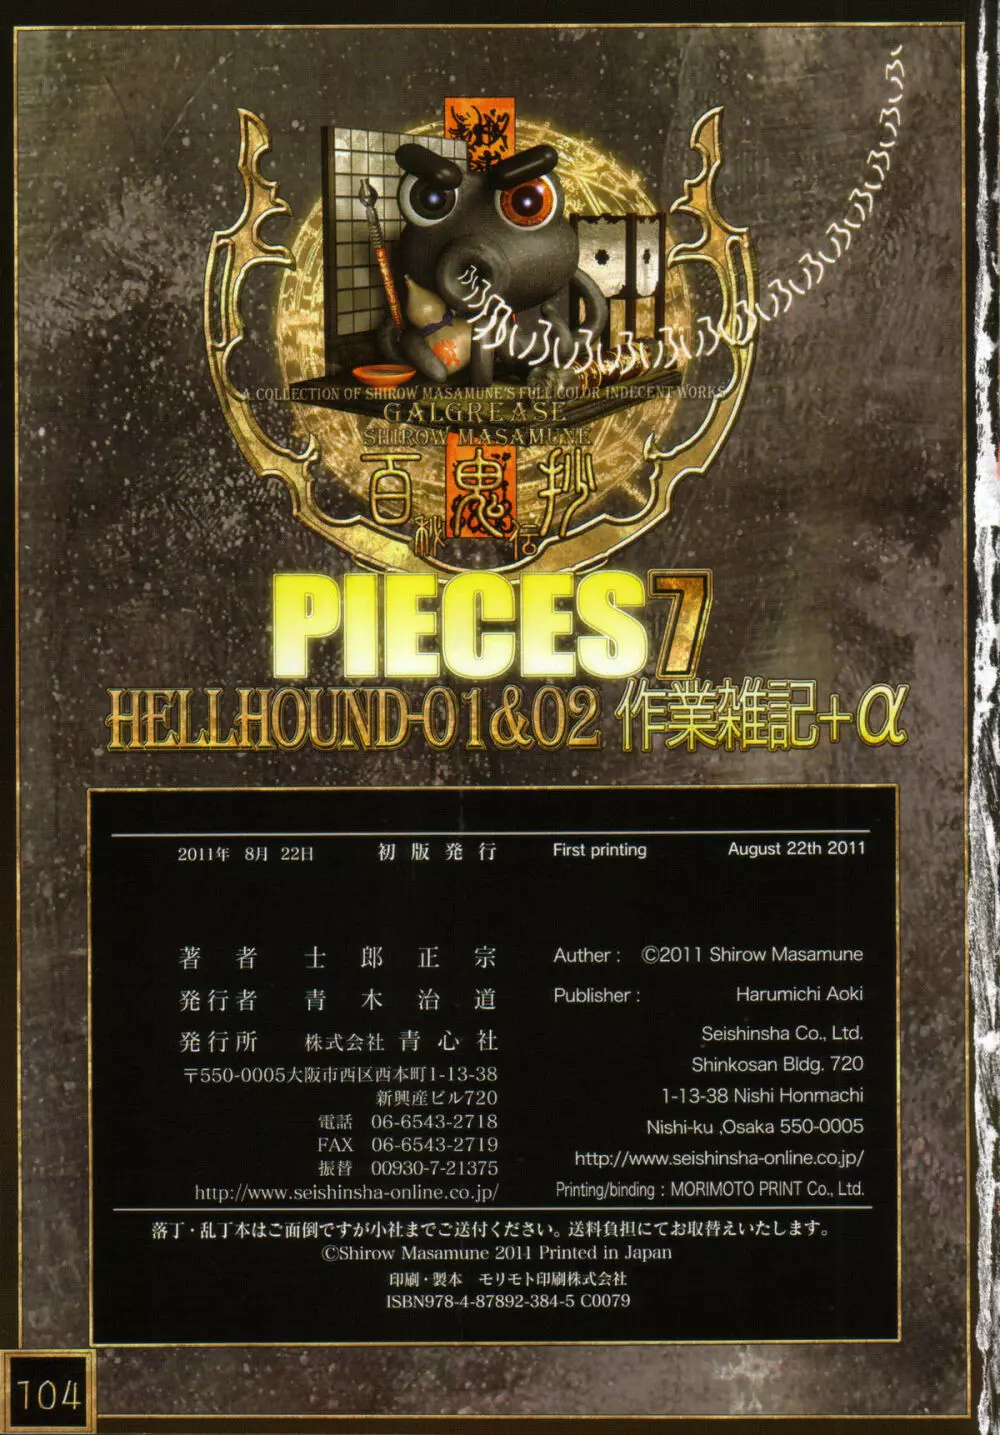 PIECES 7 HELL HOUND 01&02 作業雑記+α Page.110